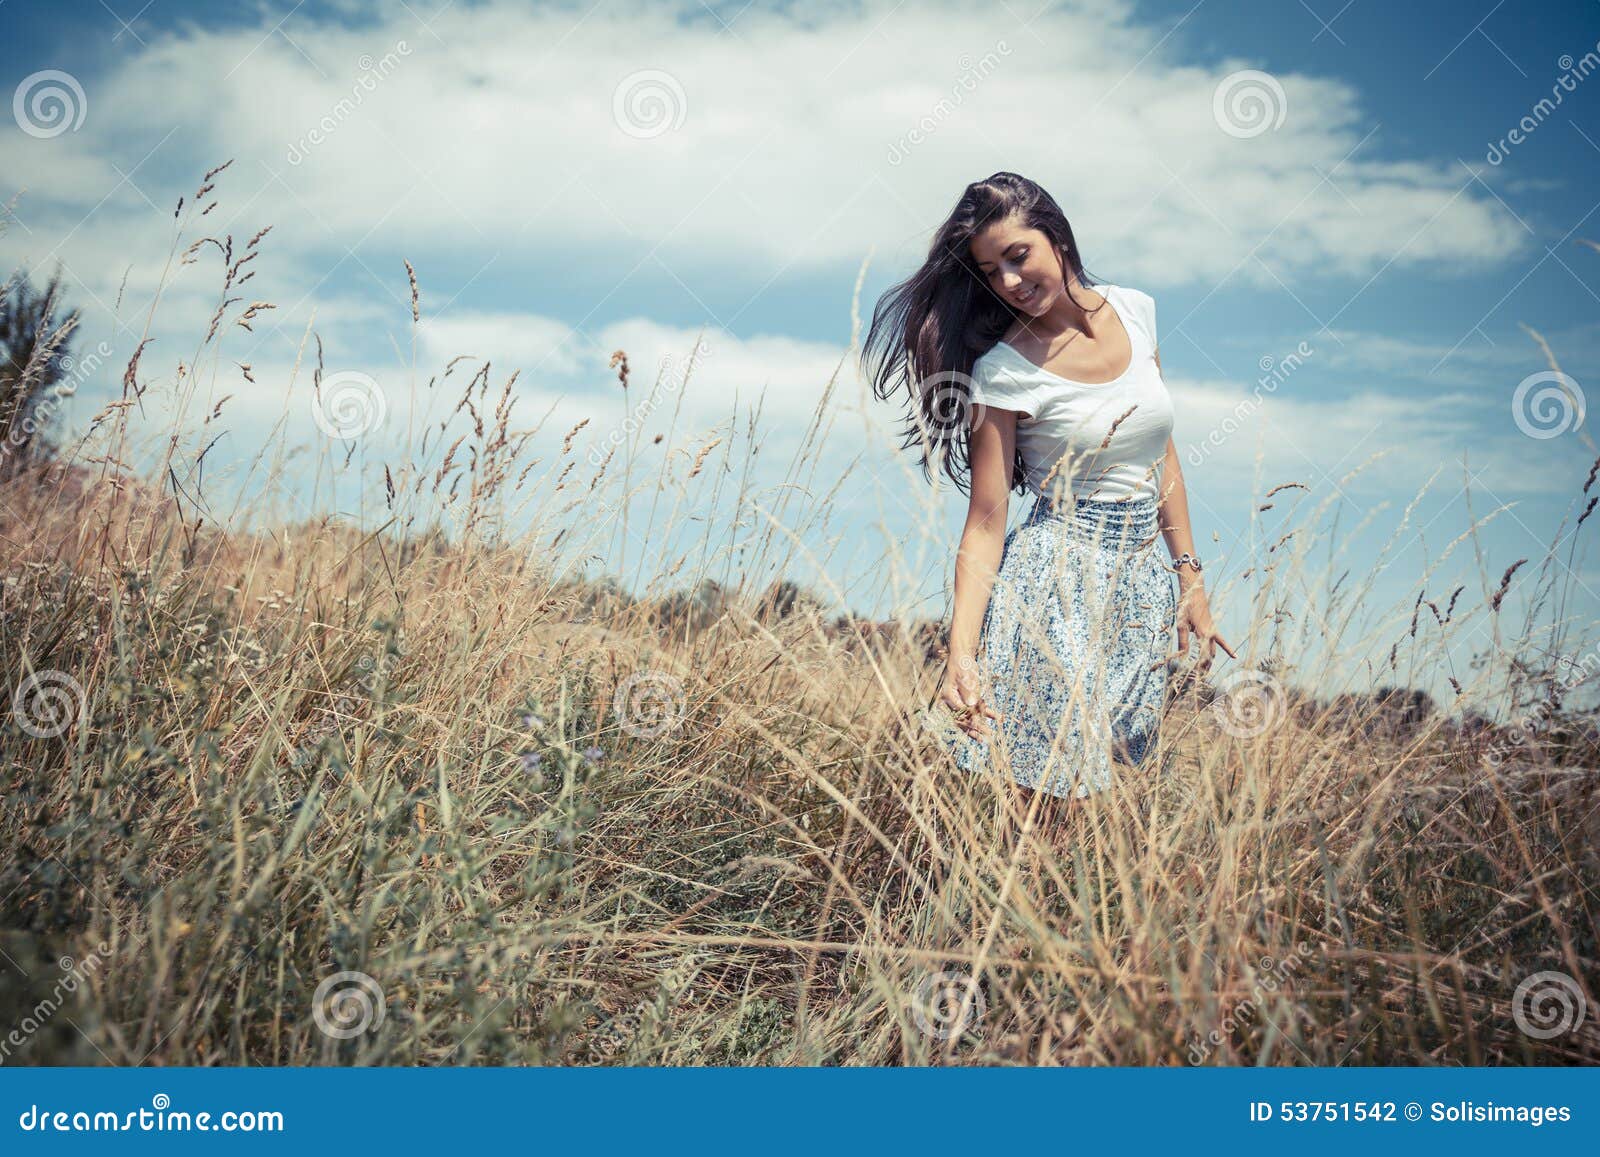 Normalt Politisk håndled 283,100 Attractive Female Model Nature Photos - Free & Royalty-Free Stock  Photos from Dreamstime